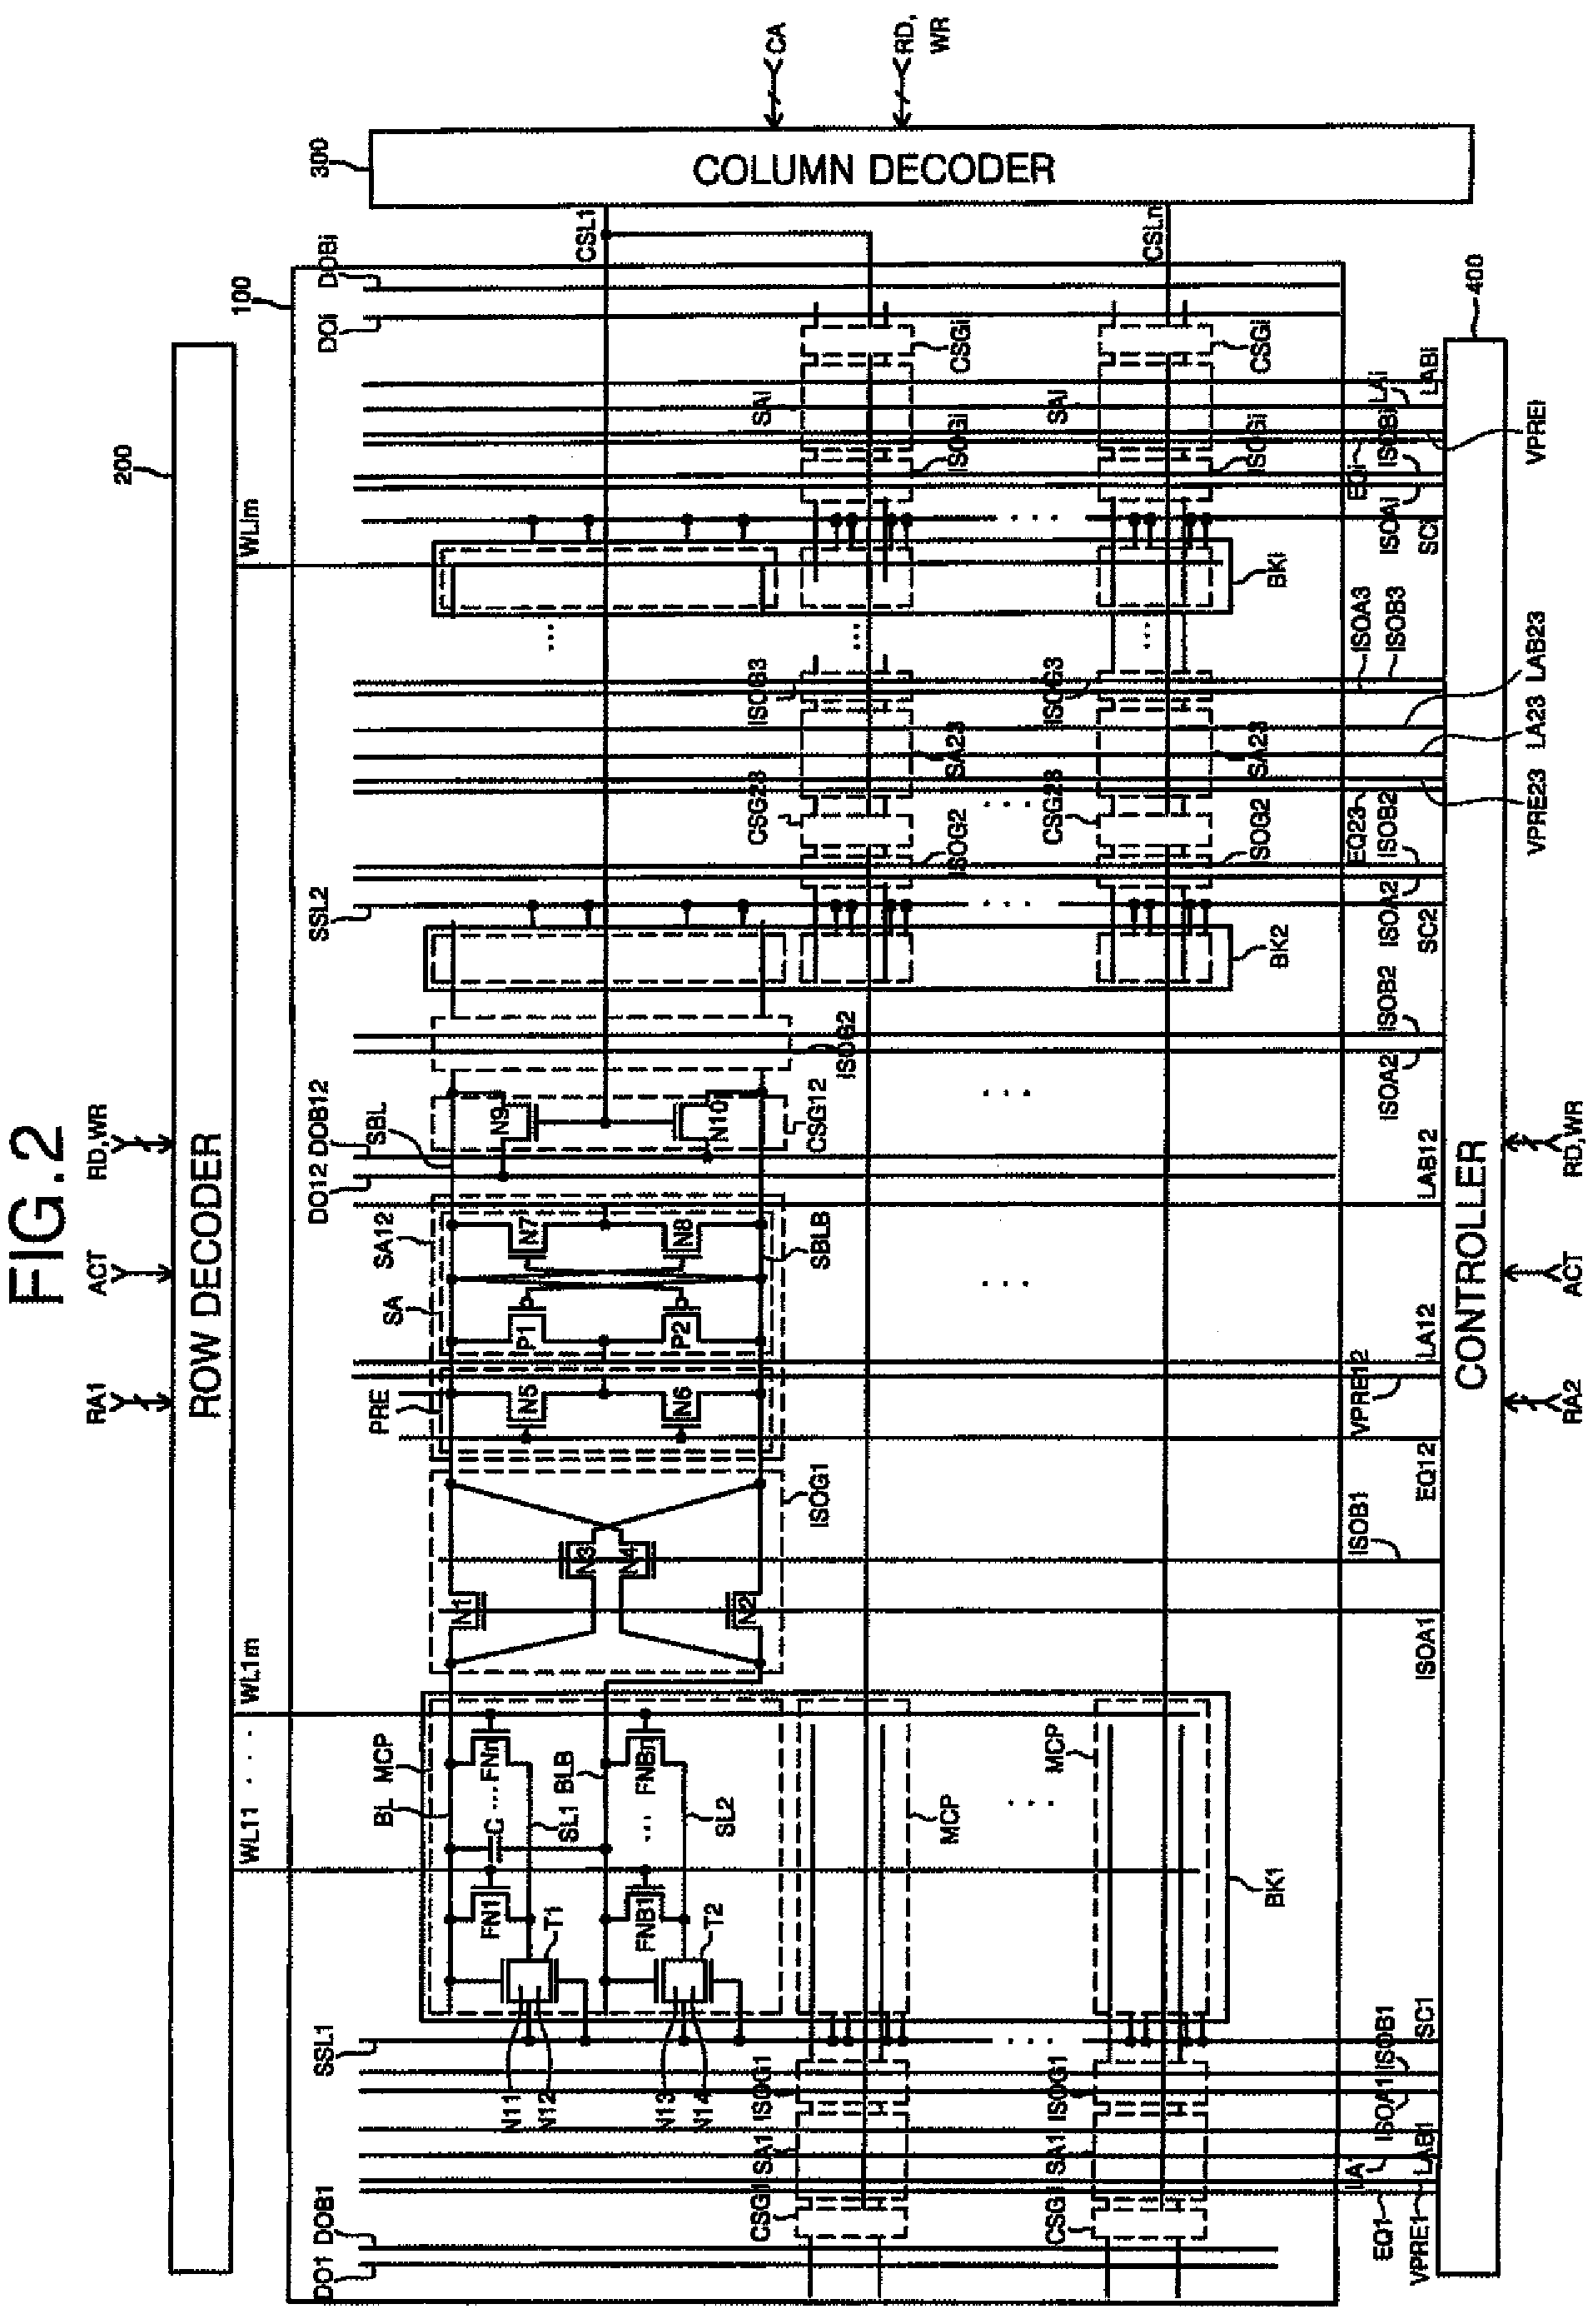 Semiconductor memory device comprising floating body memory cells and related methods of operation